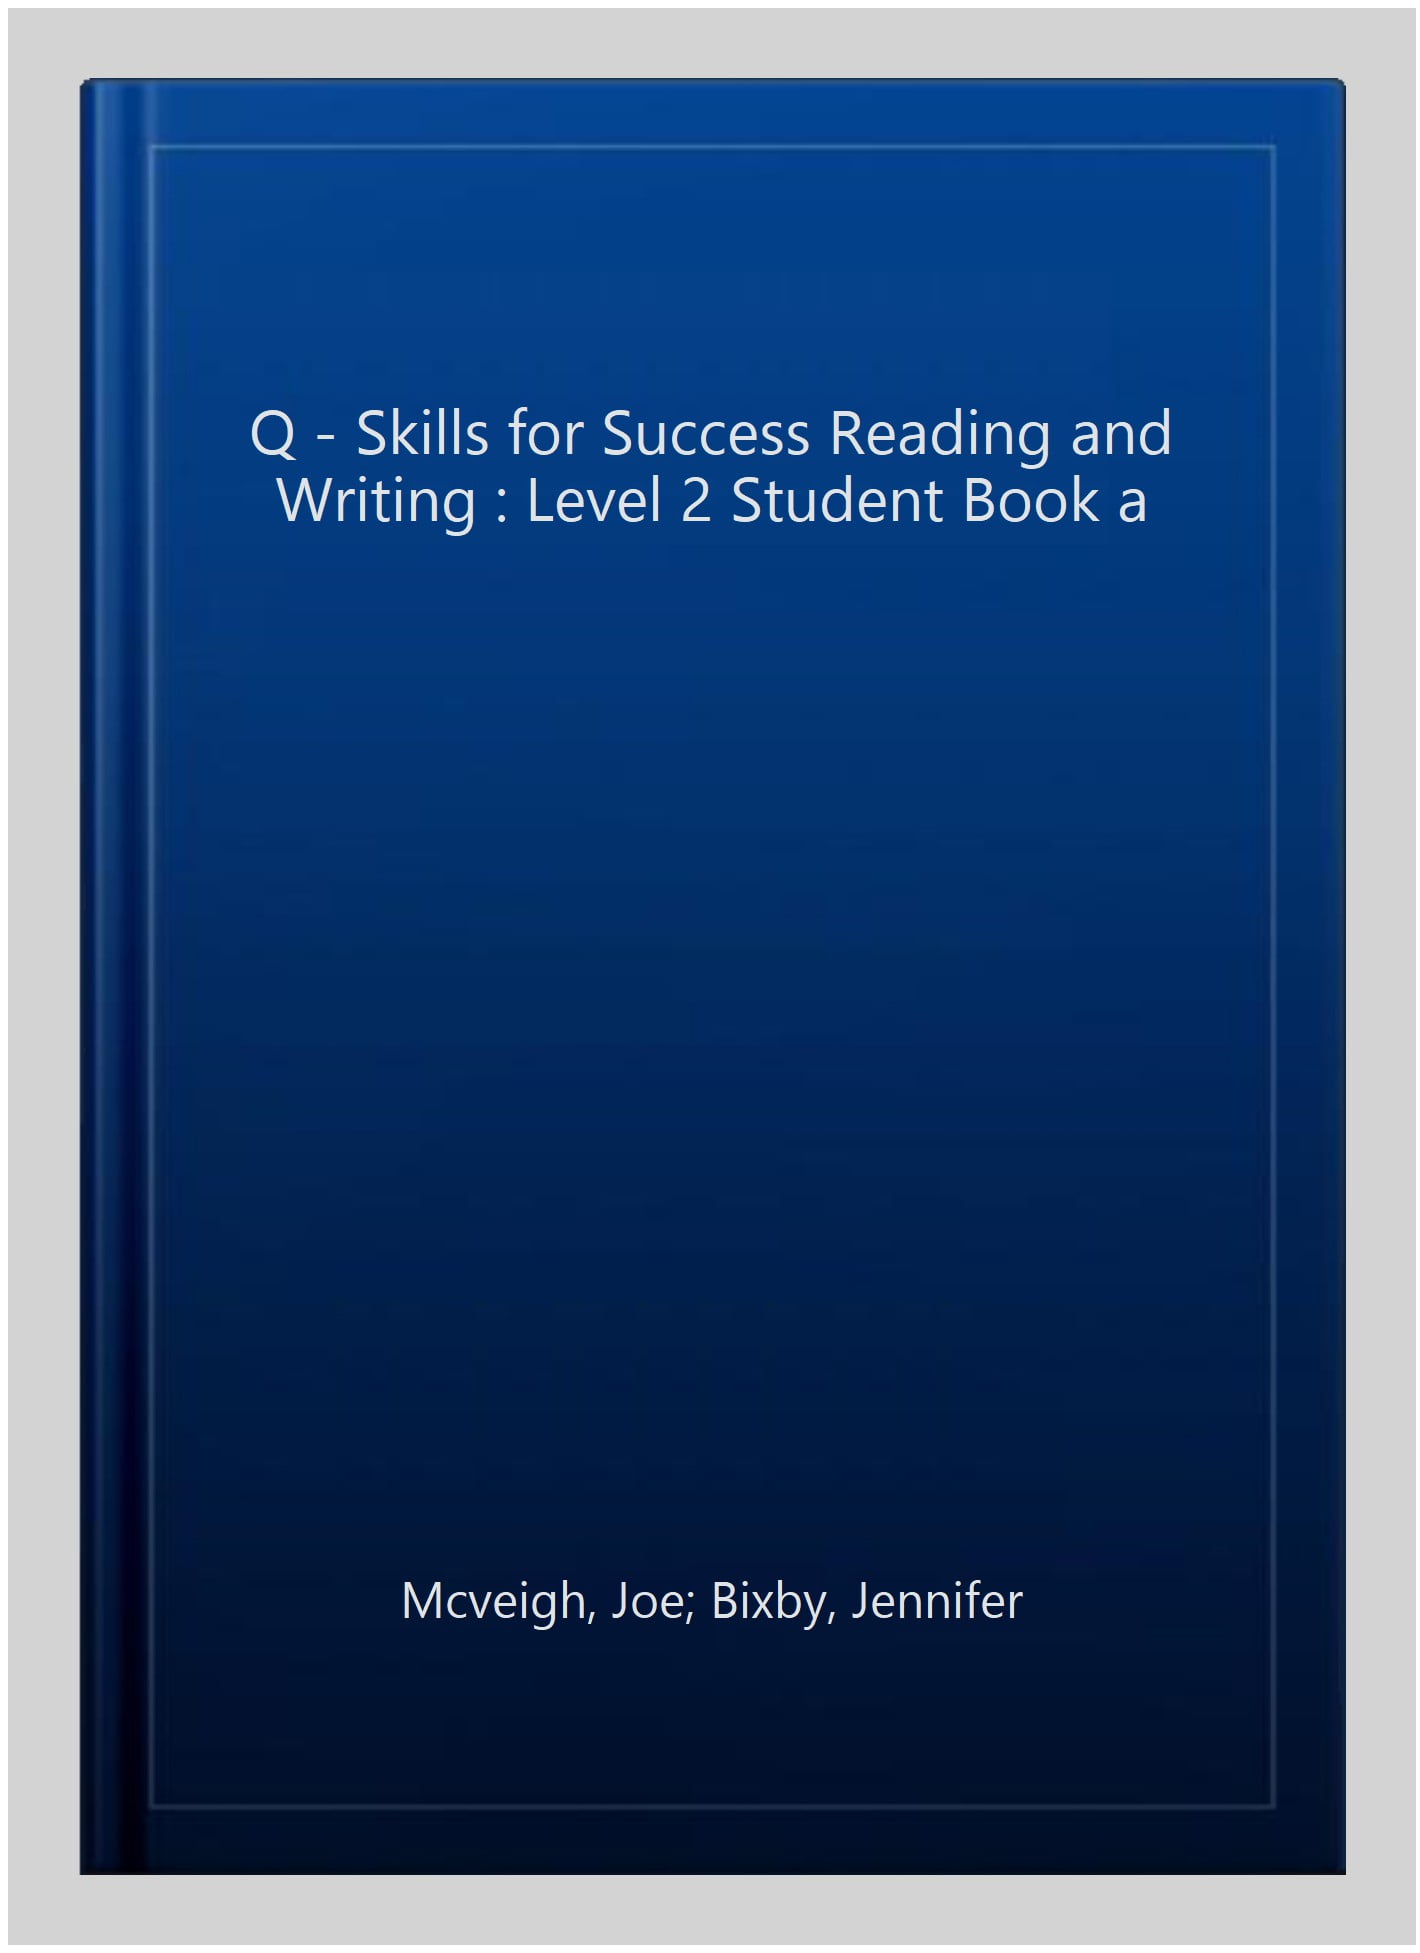 Pre-owned Q Skills for Success Reading and Writing Level Student Book  a, Paperback by Mcveigh, Joe; Bixby, Jennifer, ISBN 0194818748, ISBN-13  9780194818742